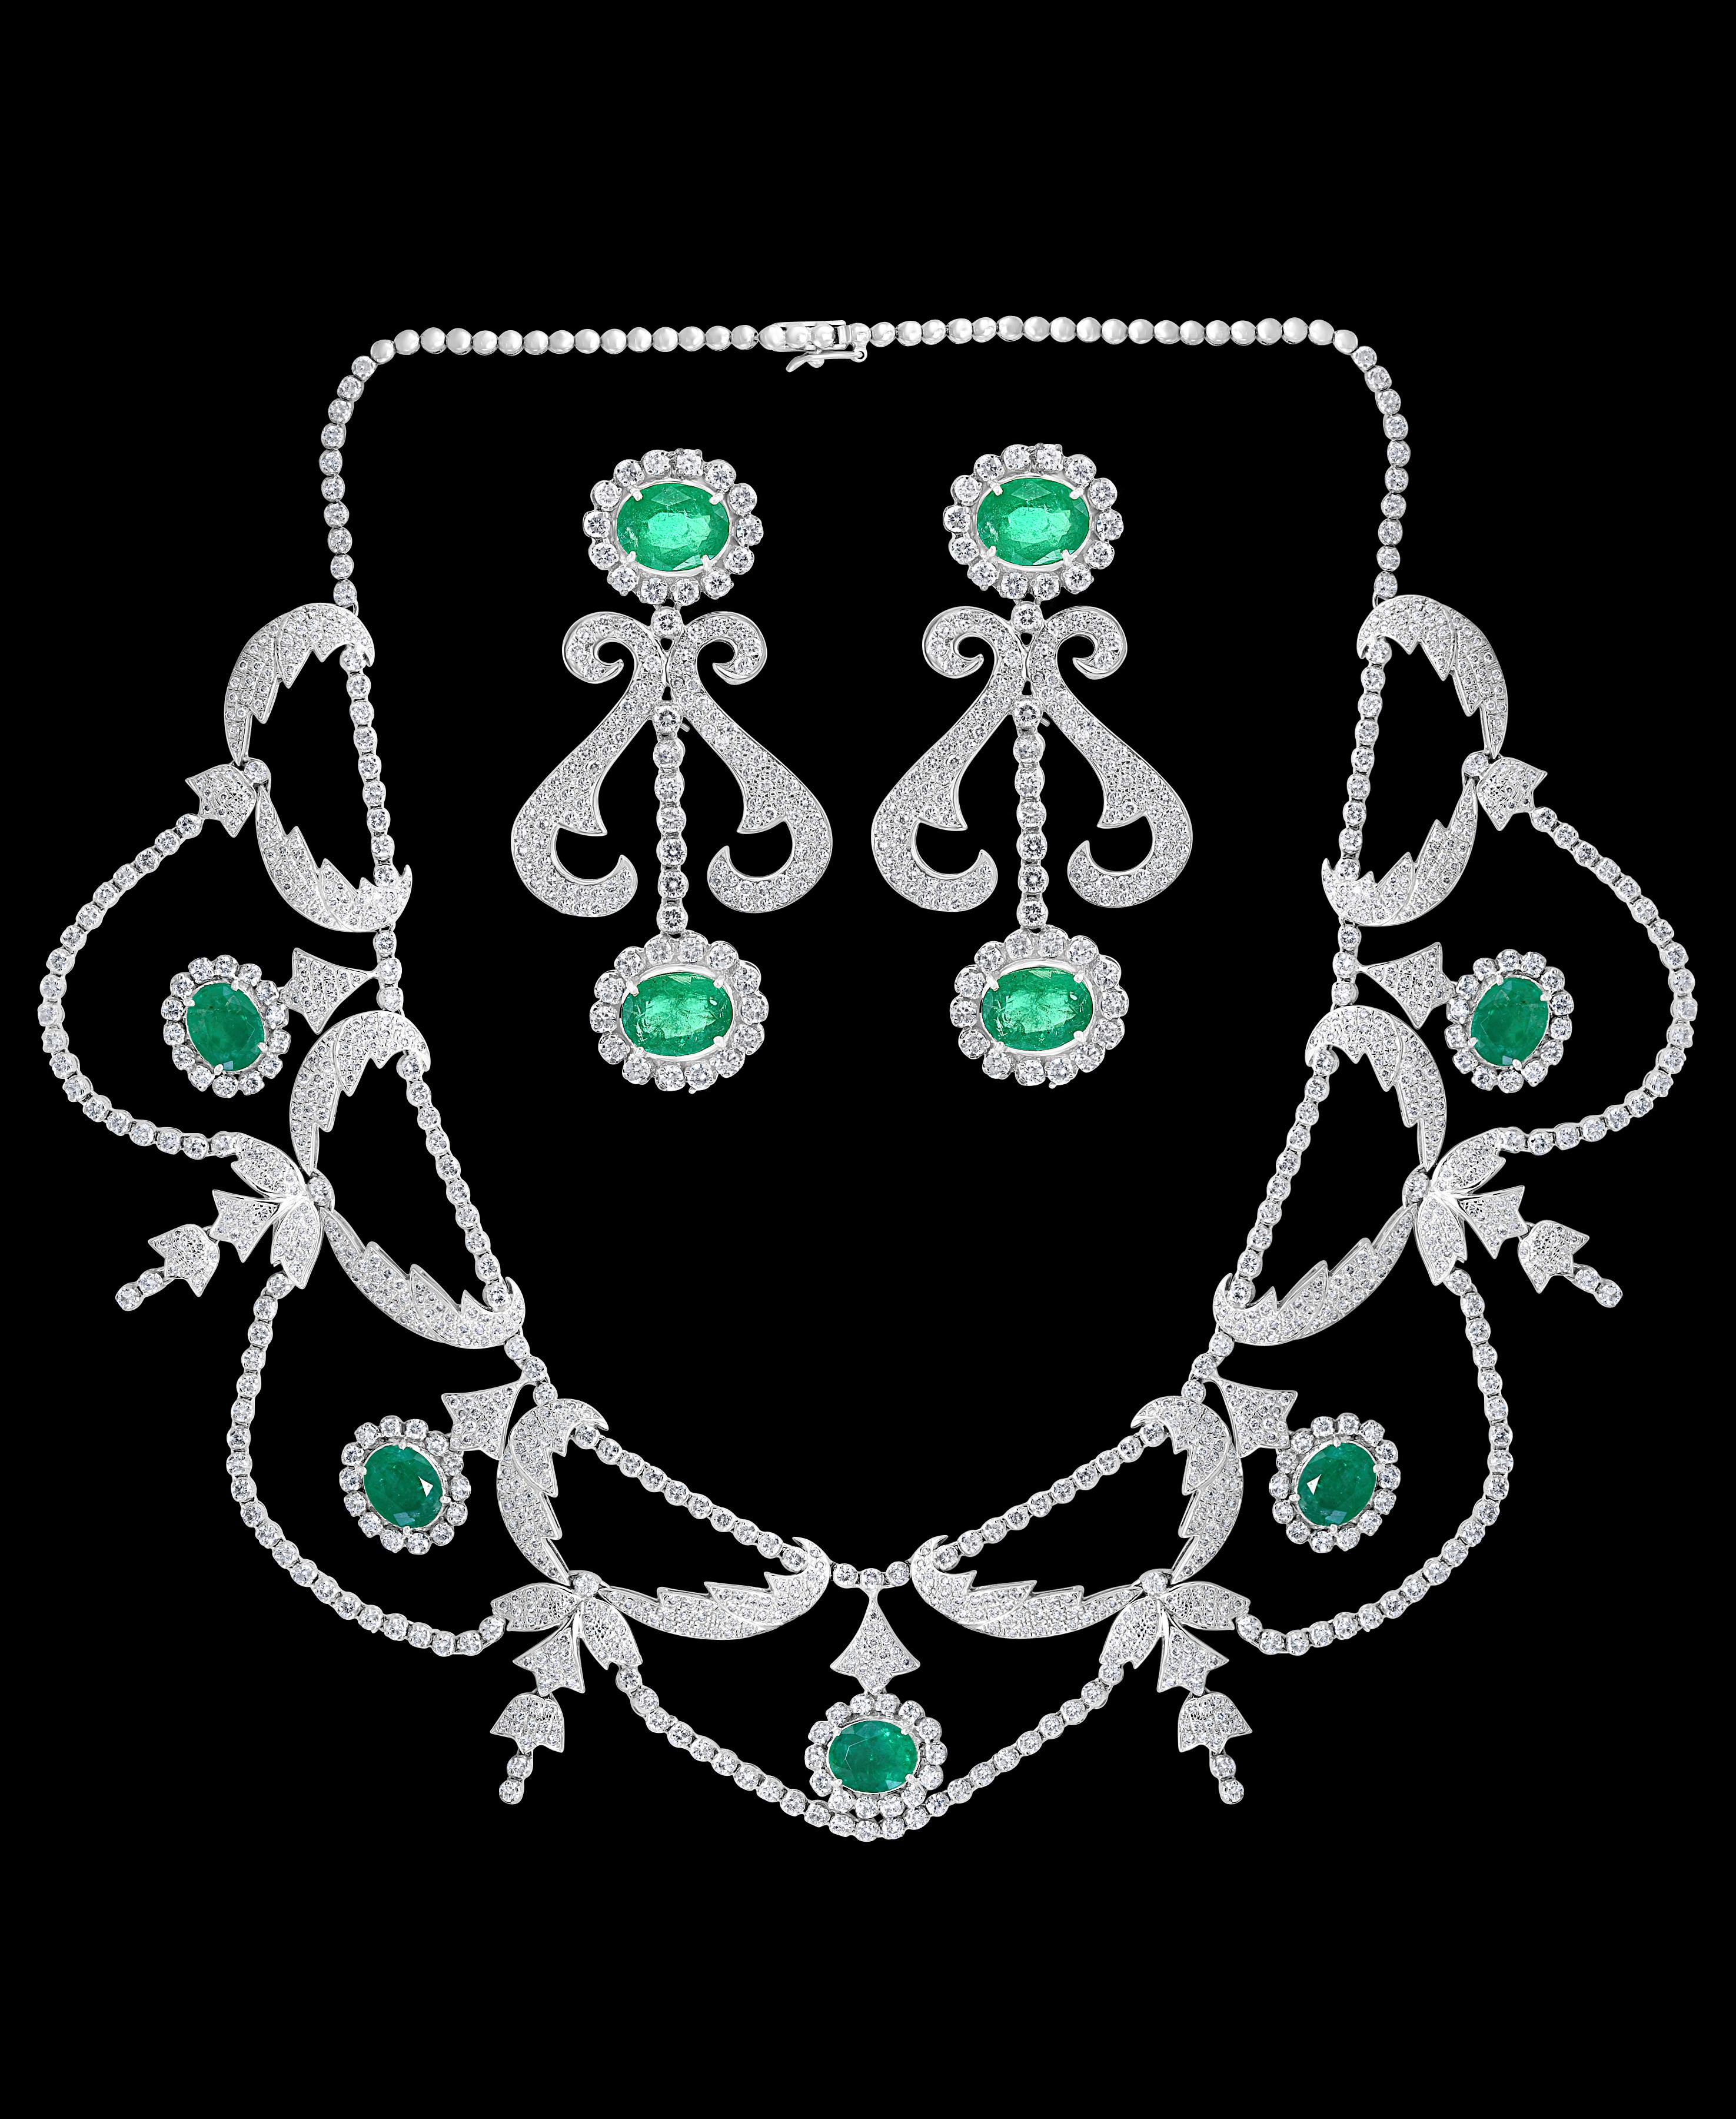 Oval  Shape Natural  Zambian  Emerald And Diamond fringe  Necklace  Earring  Bridal Suite Estate
amazingly beautiful set , Fabulous design , Lays down on the neck beautifully
Emerald & diamond necklace of classic design, featuring  oval emeralds,